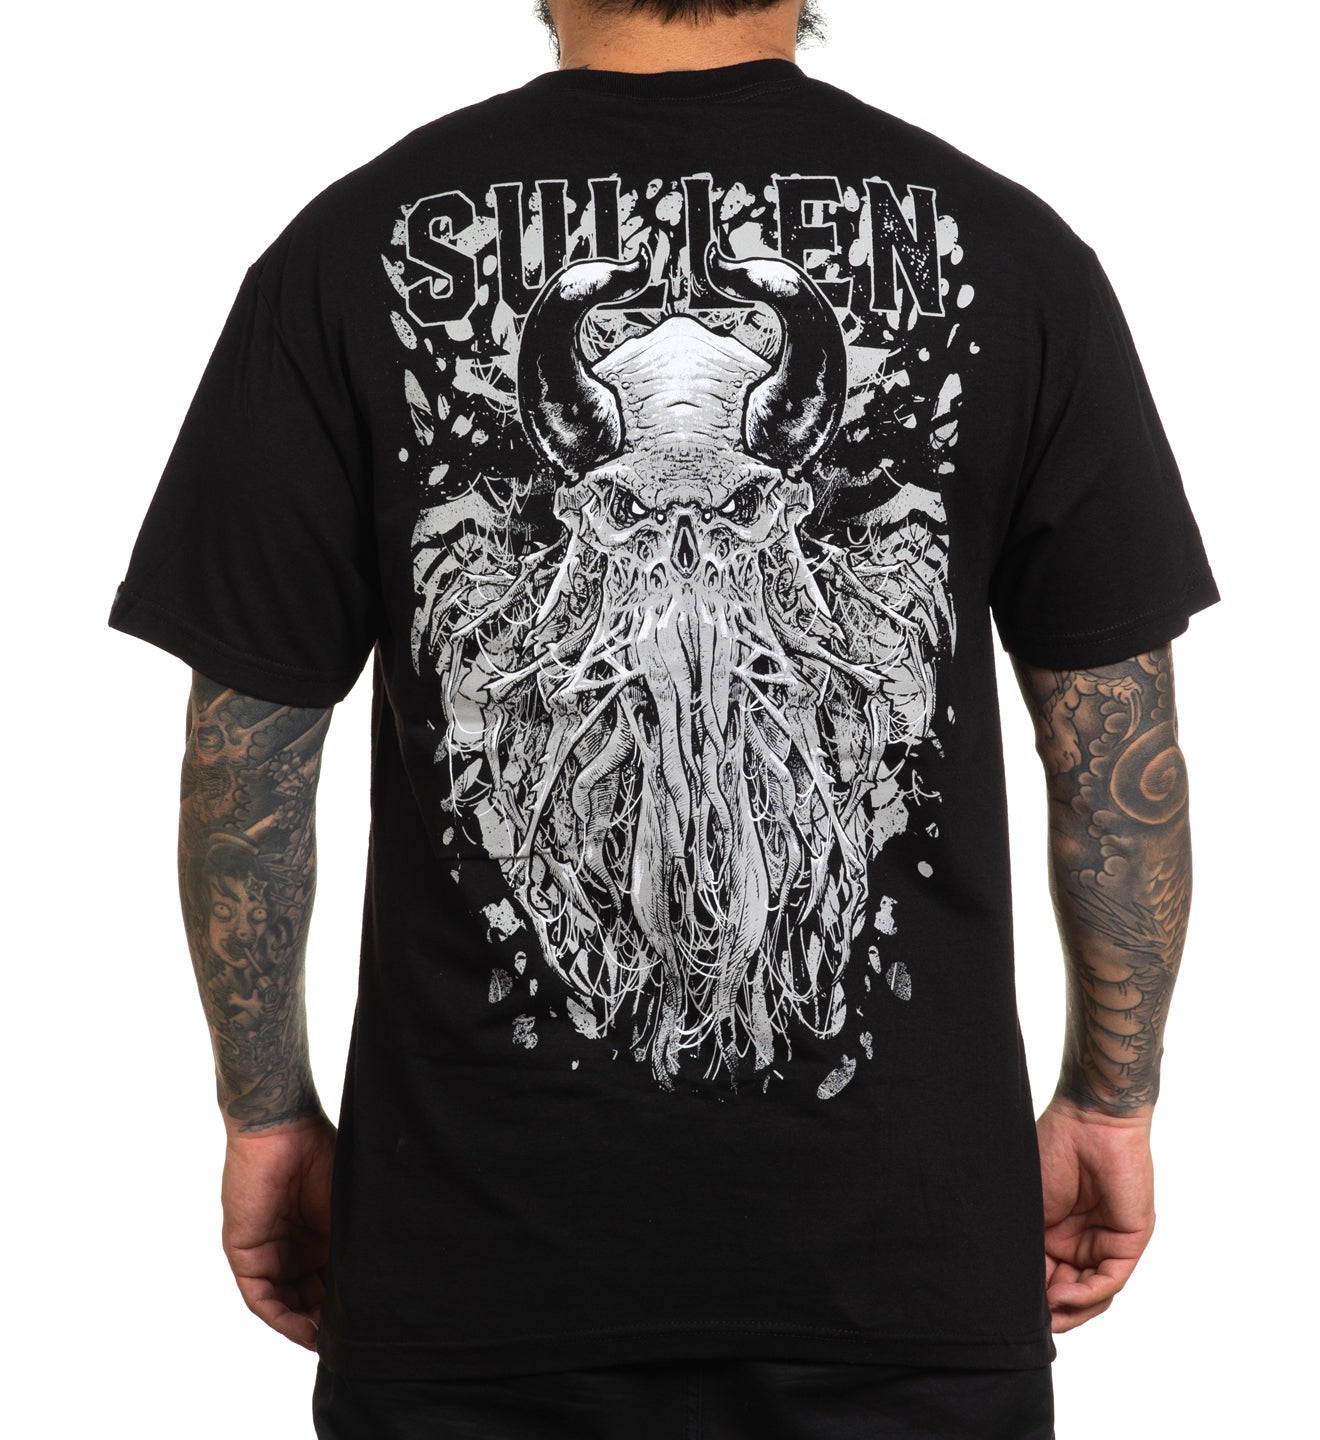 SULLEN CLOTHING NIGHTMARE COLLECTION 5 T-SHIRTS BOX SET